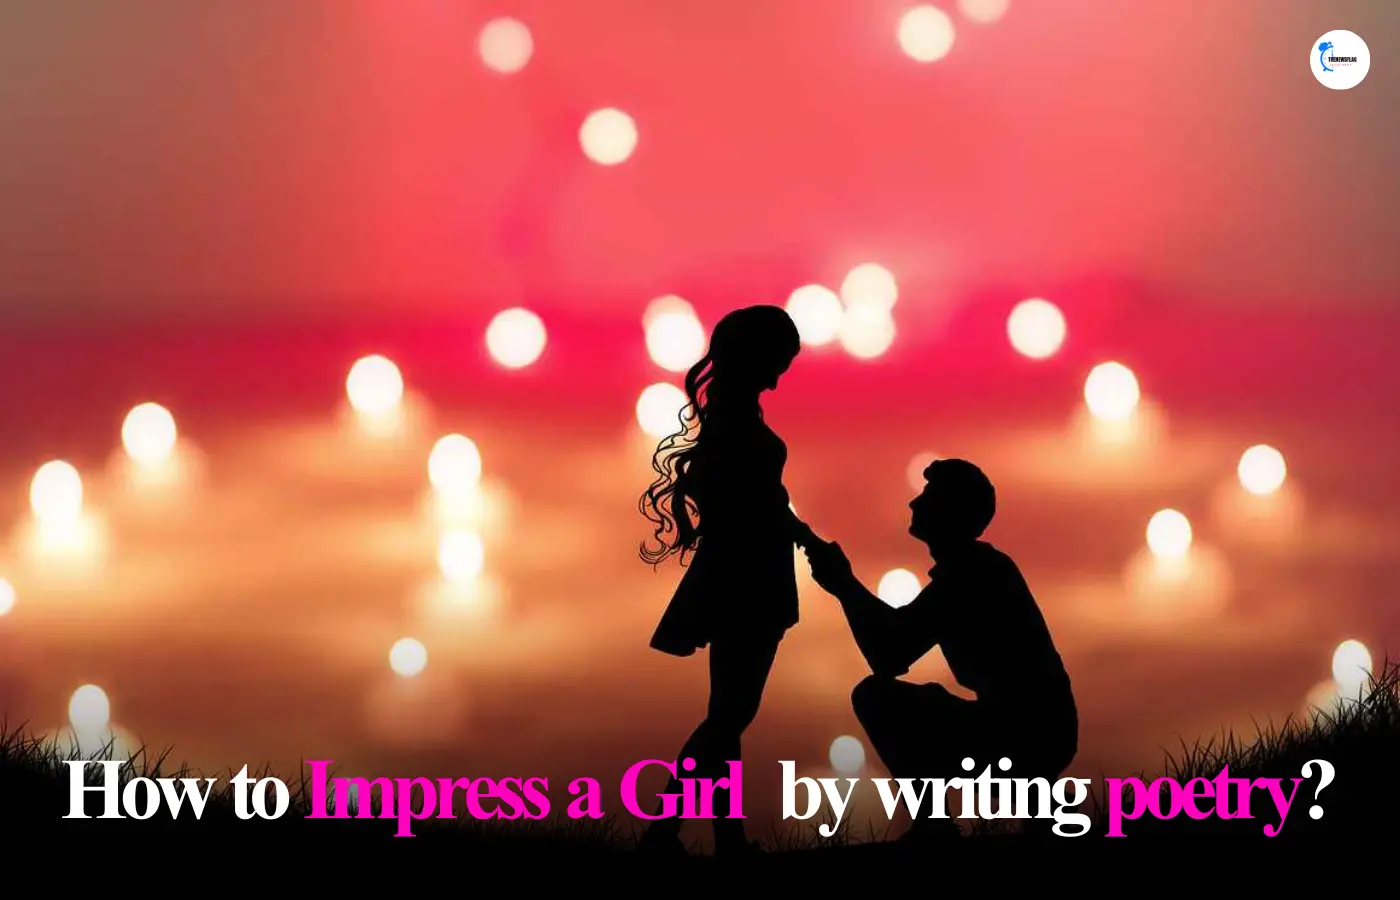 How can I impress a Girl by writing poems?